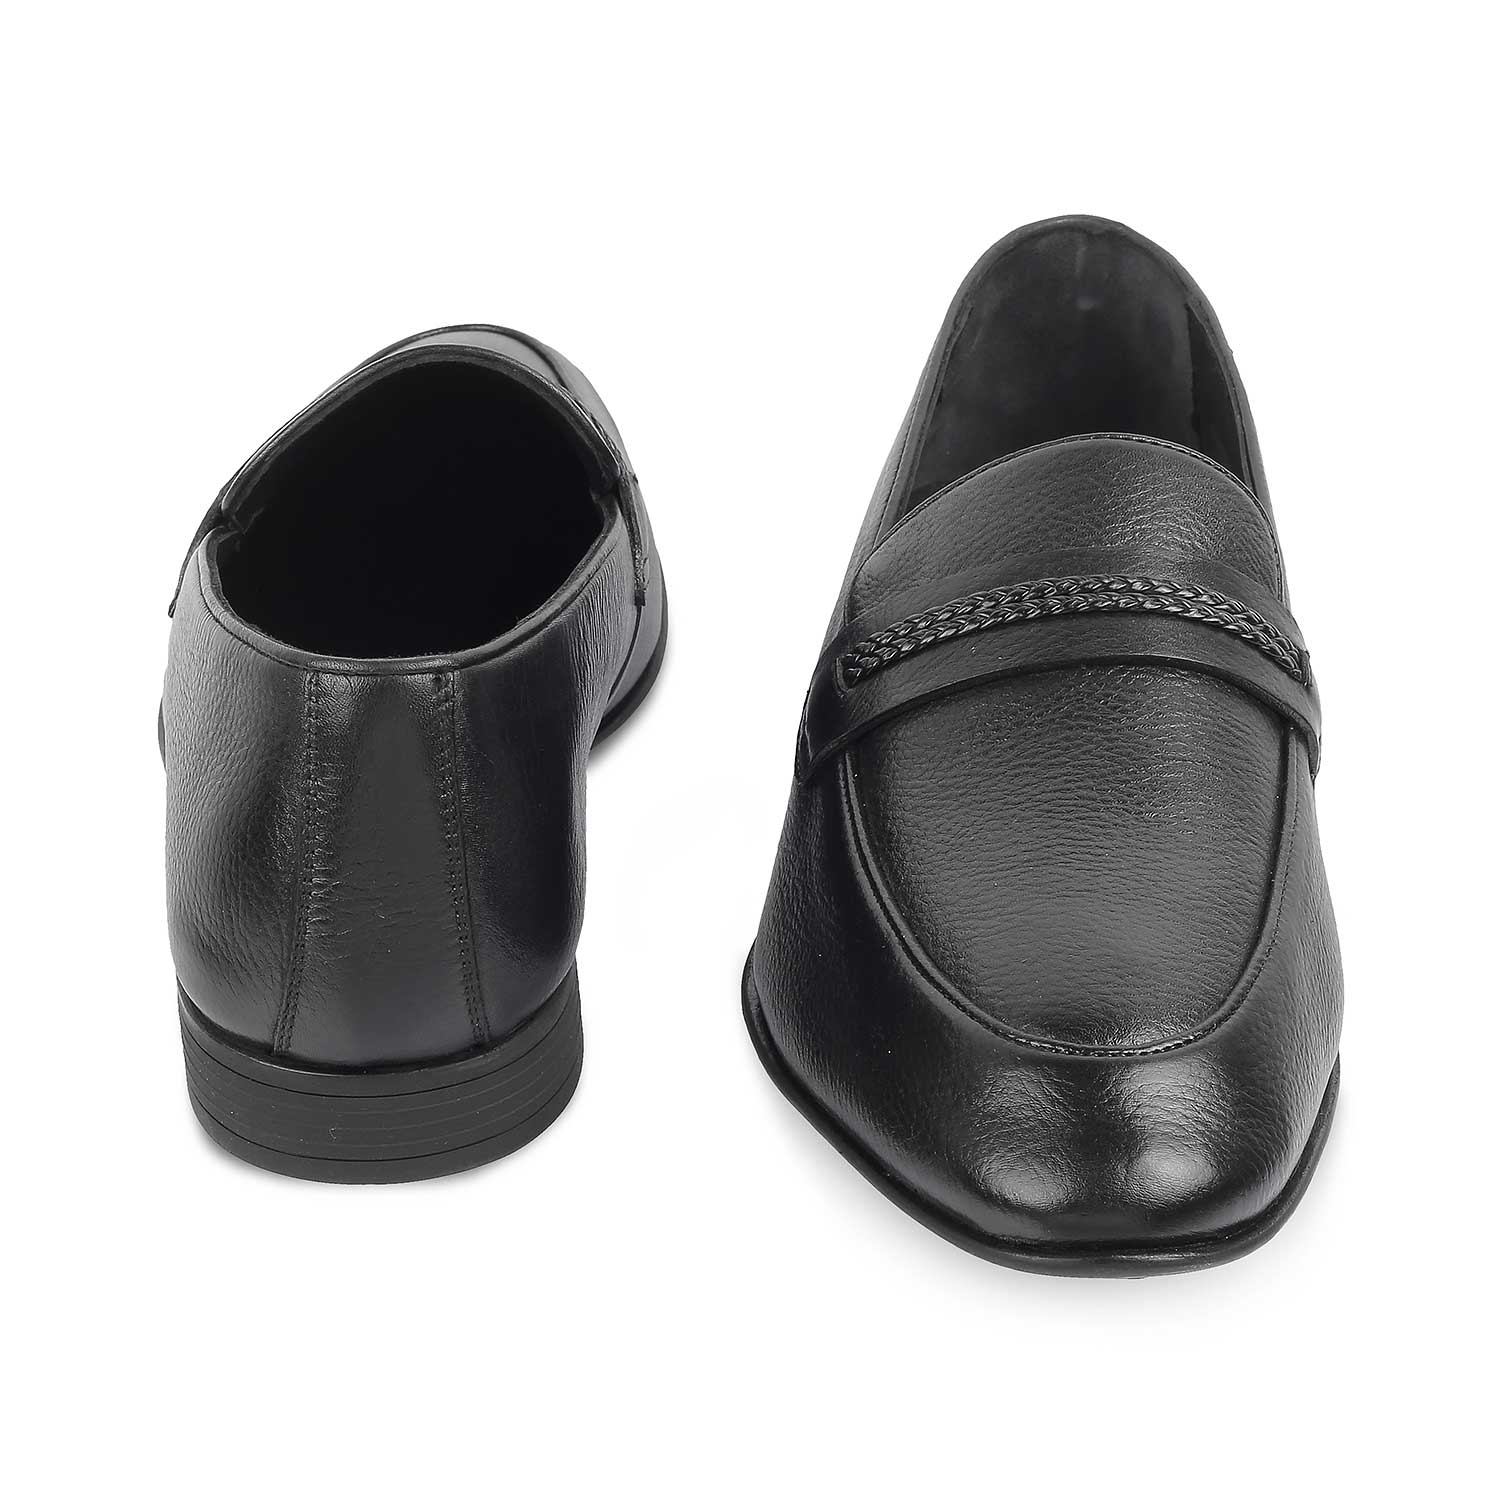 The Bochum Black Men's Leather Loafers Tresmode - Tresmode